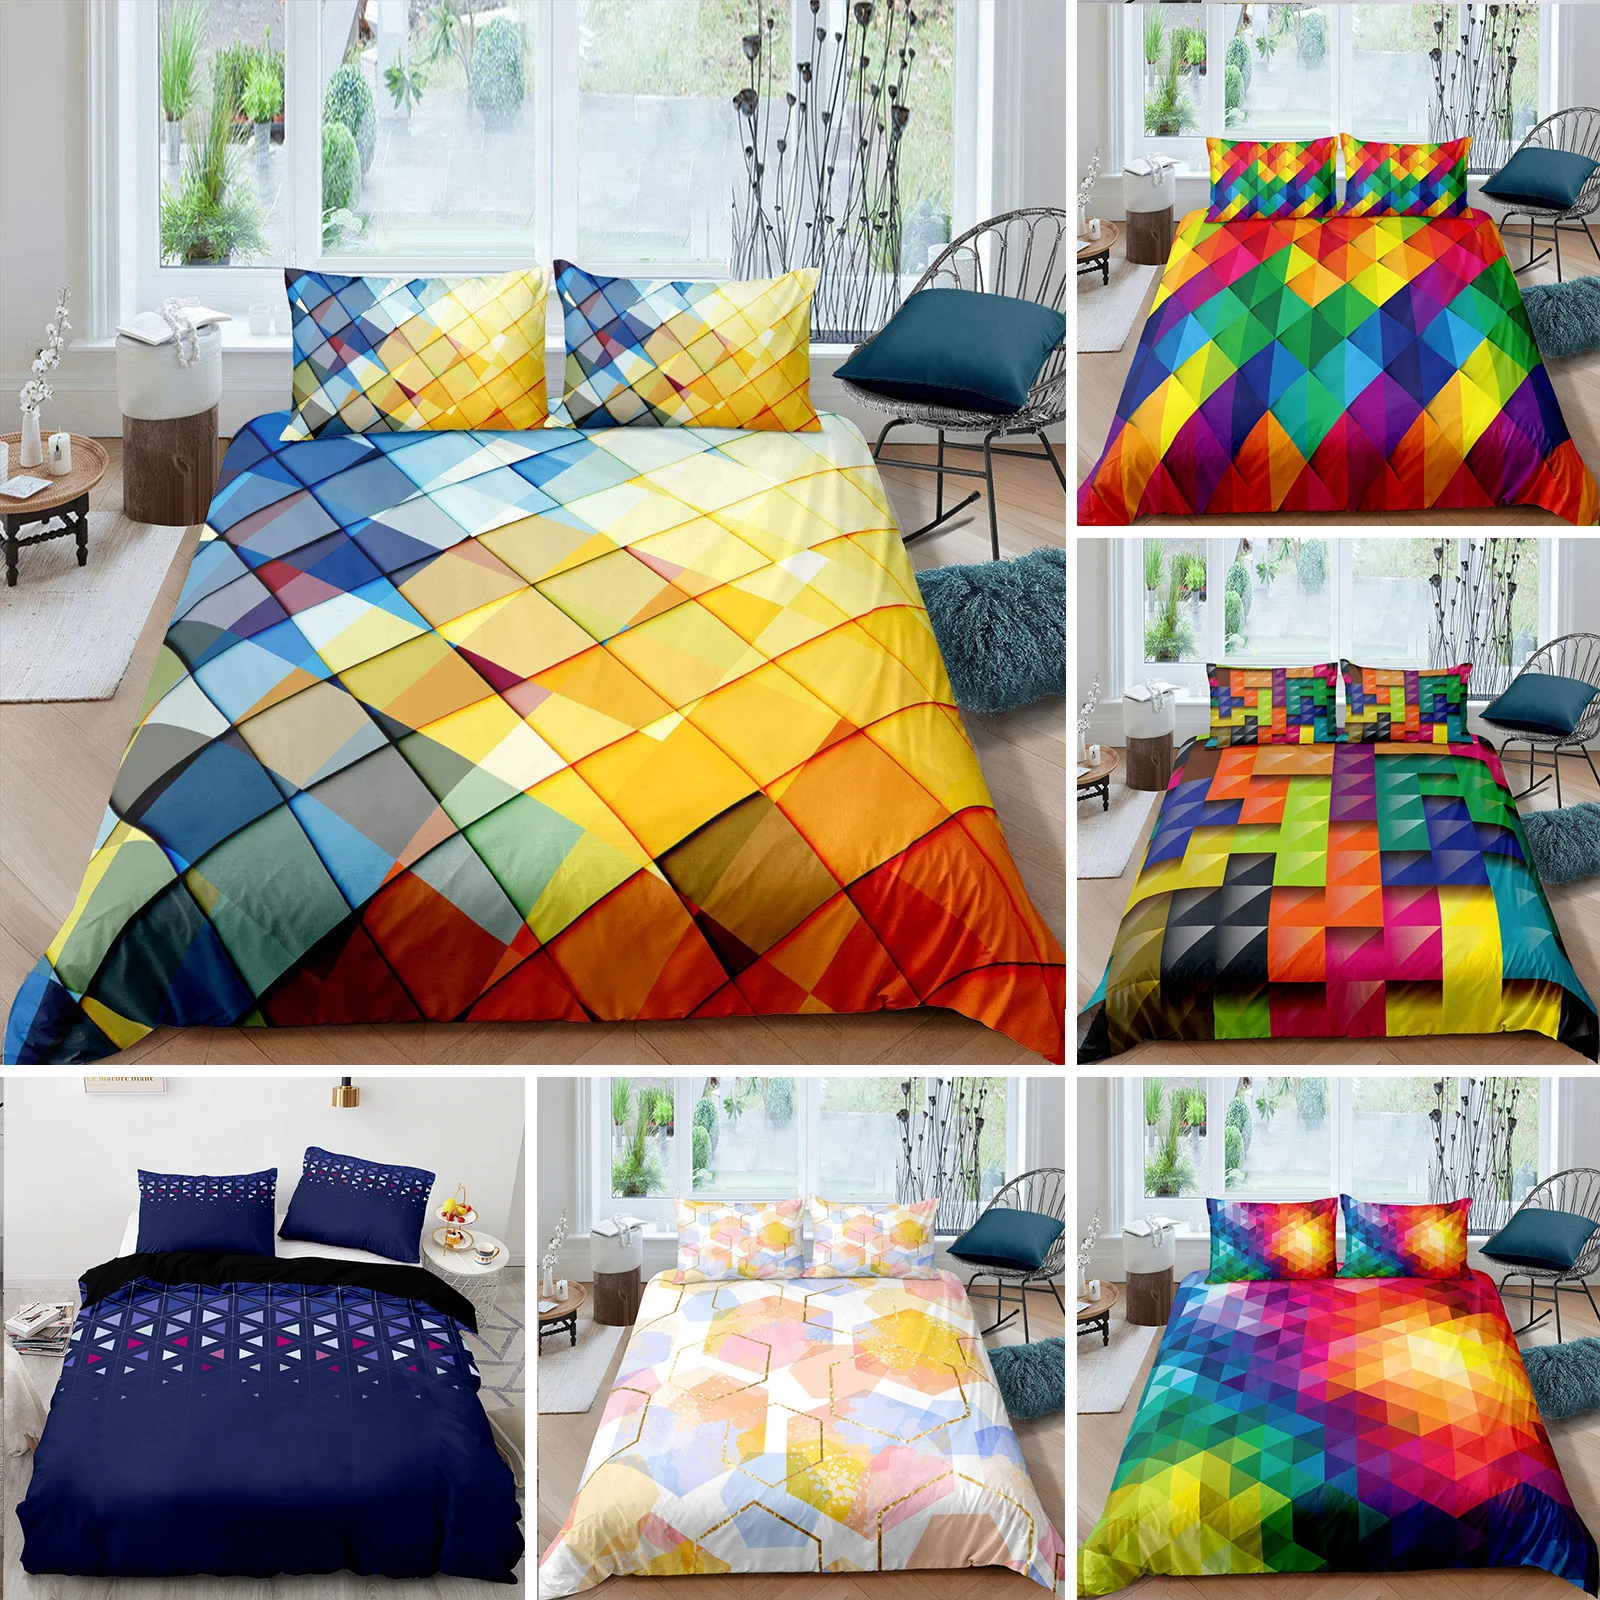 

Red Glowing Polygonal Grid Pattern Bedding Set Duvet Cover Bedroom Covers Single Twin King Size Quilt Cover Home Textile 2/3PCS